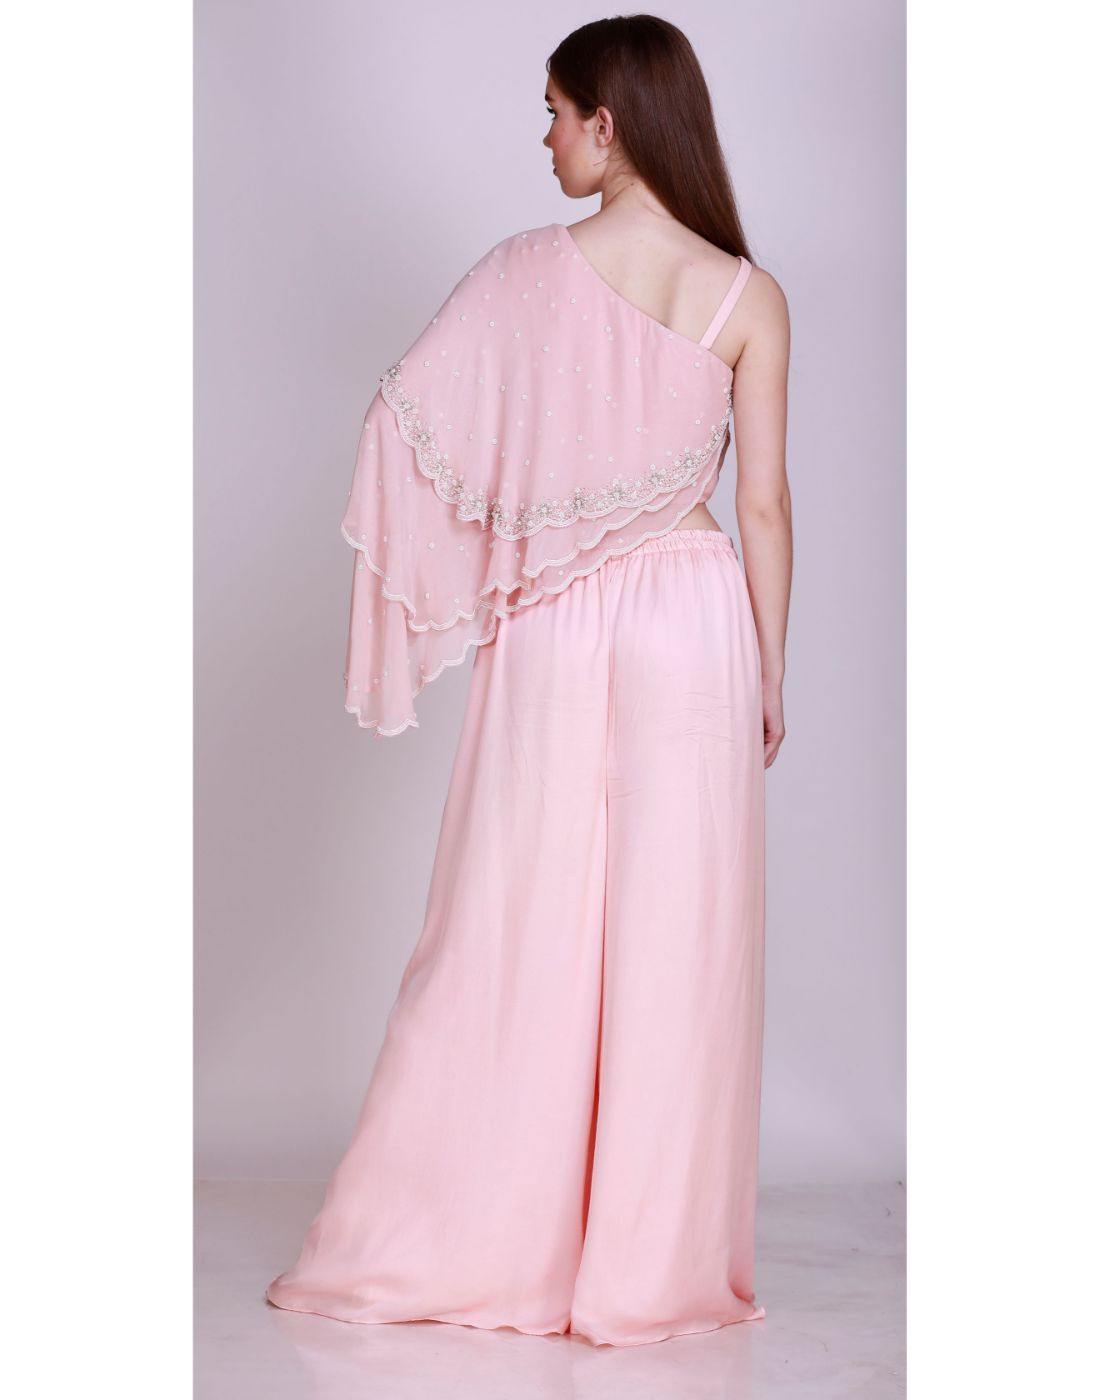 Baby Pink Elegant & Fashionable Rayon Solid Color Waist Elasticated Casual  Wear Women's Readymade Palazzo pants